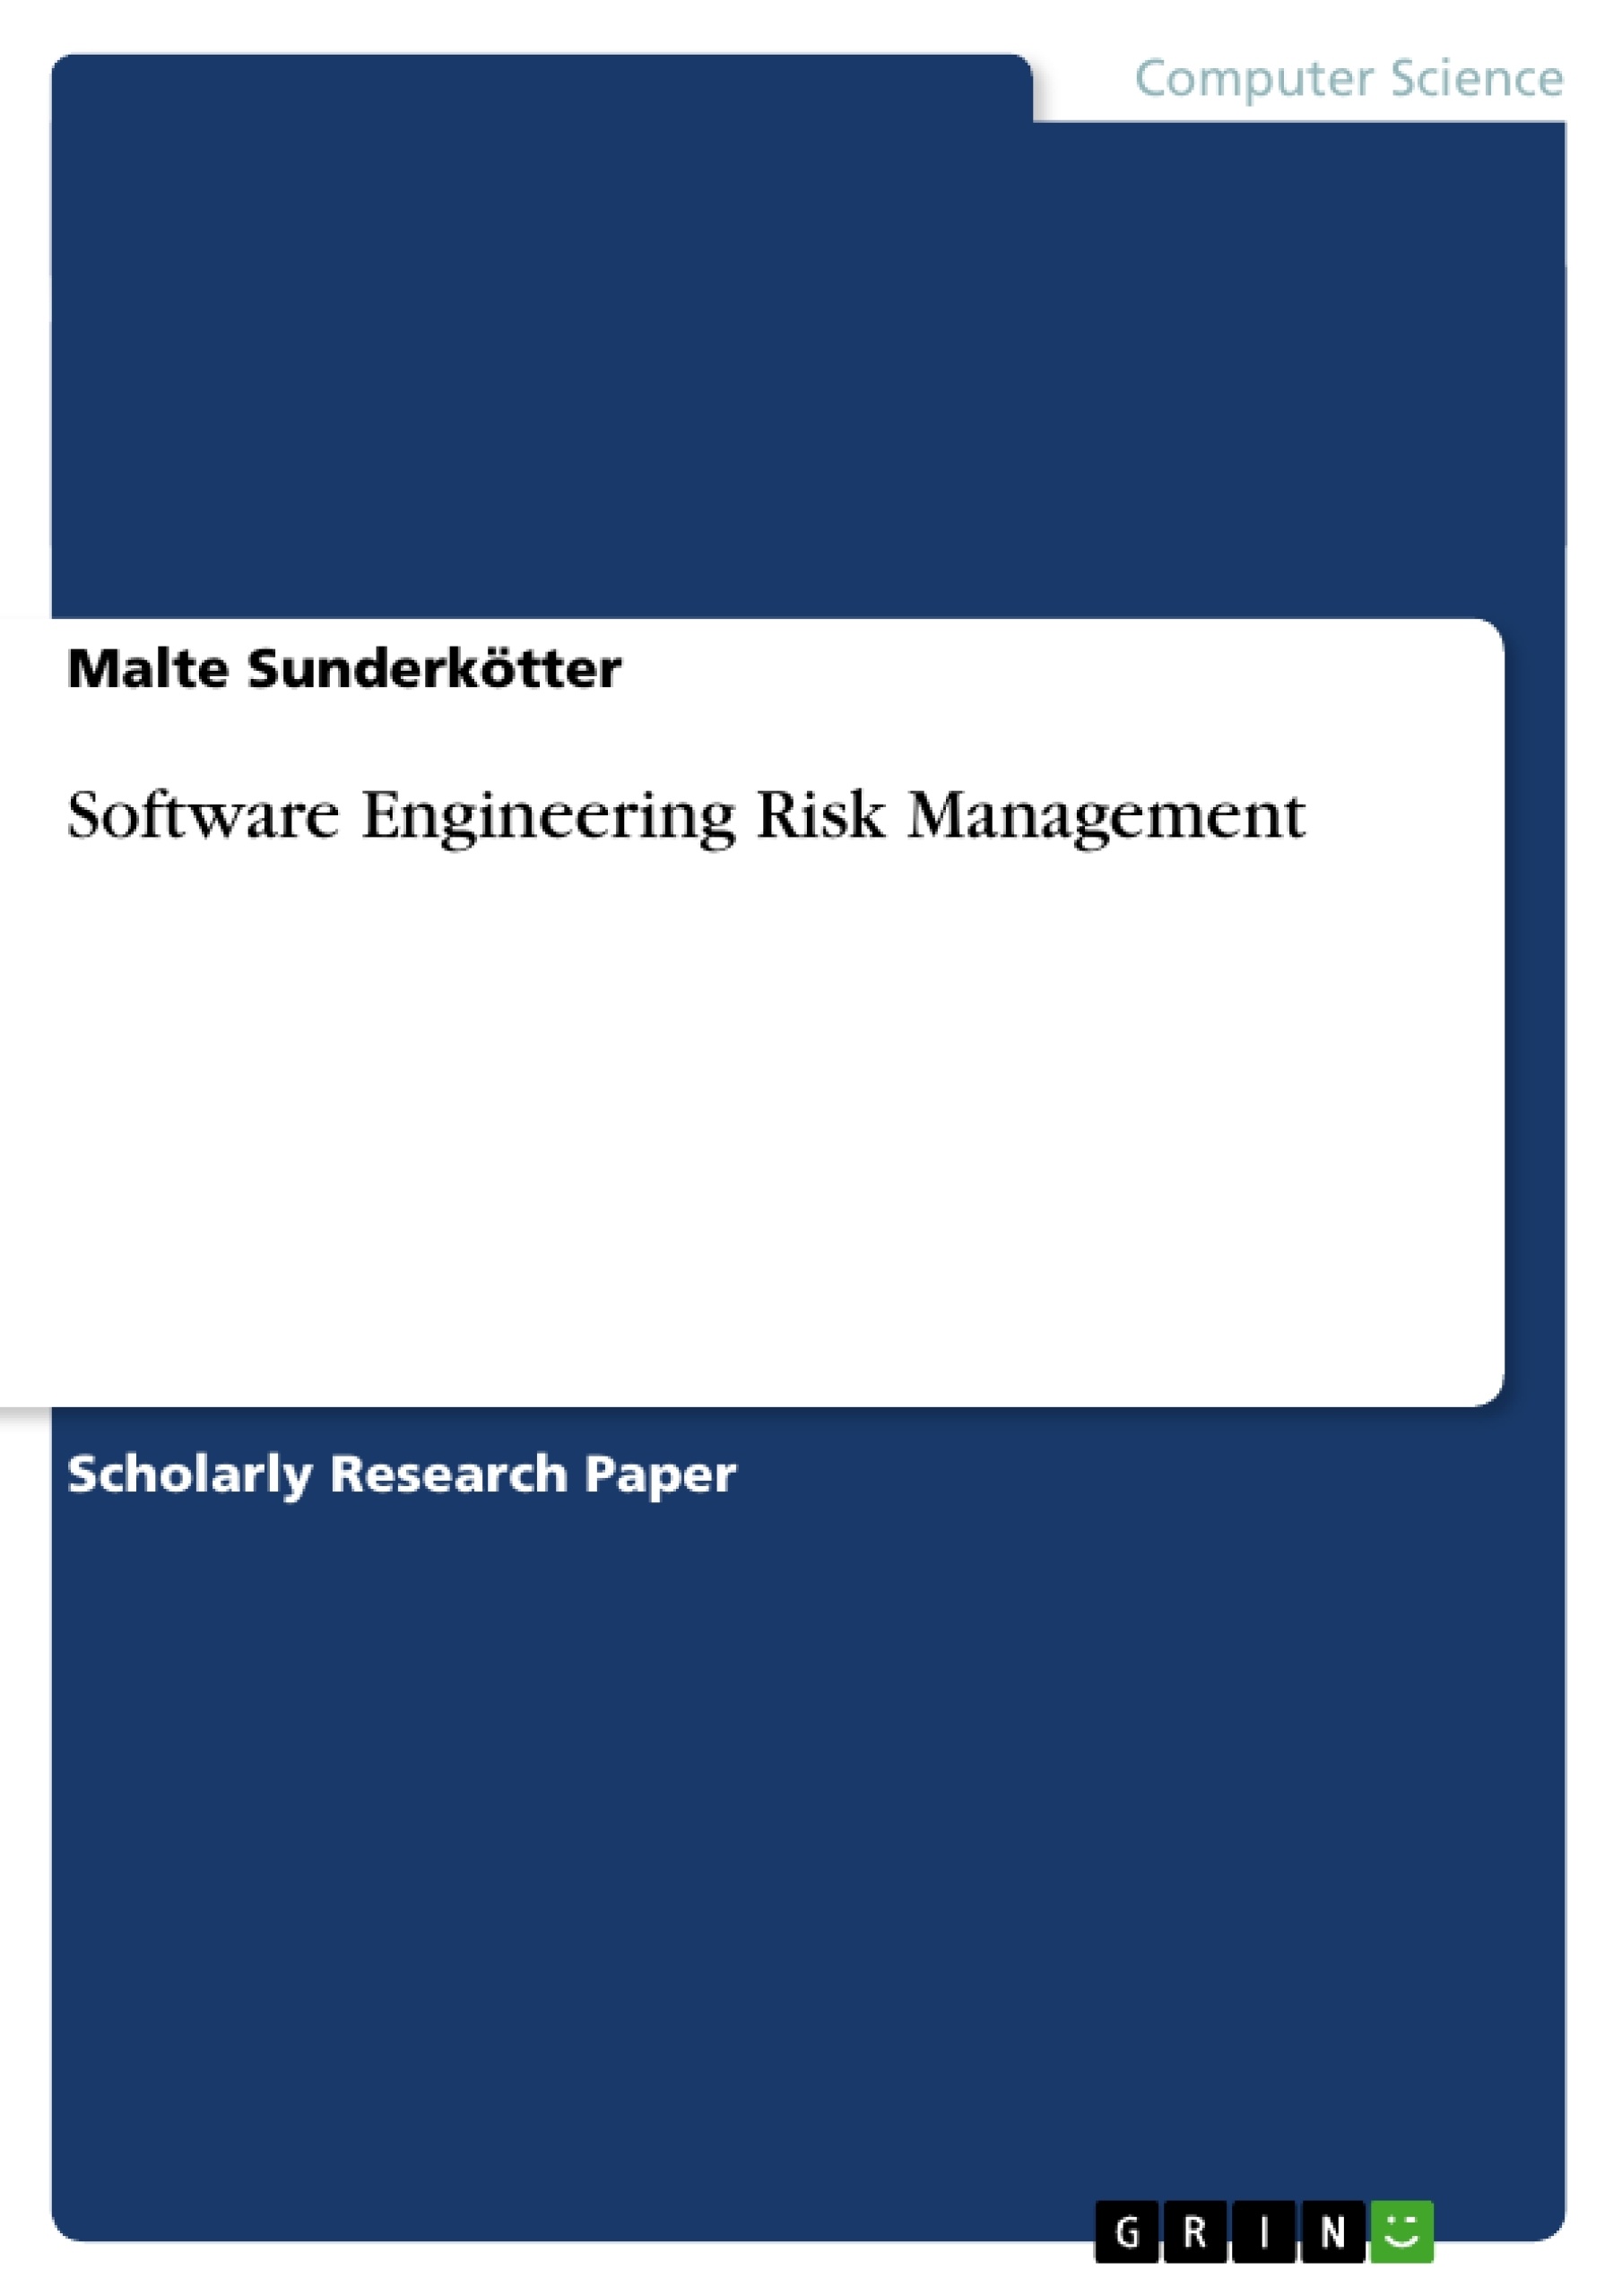 research papers in software engineering